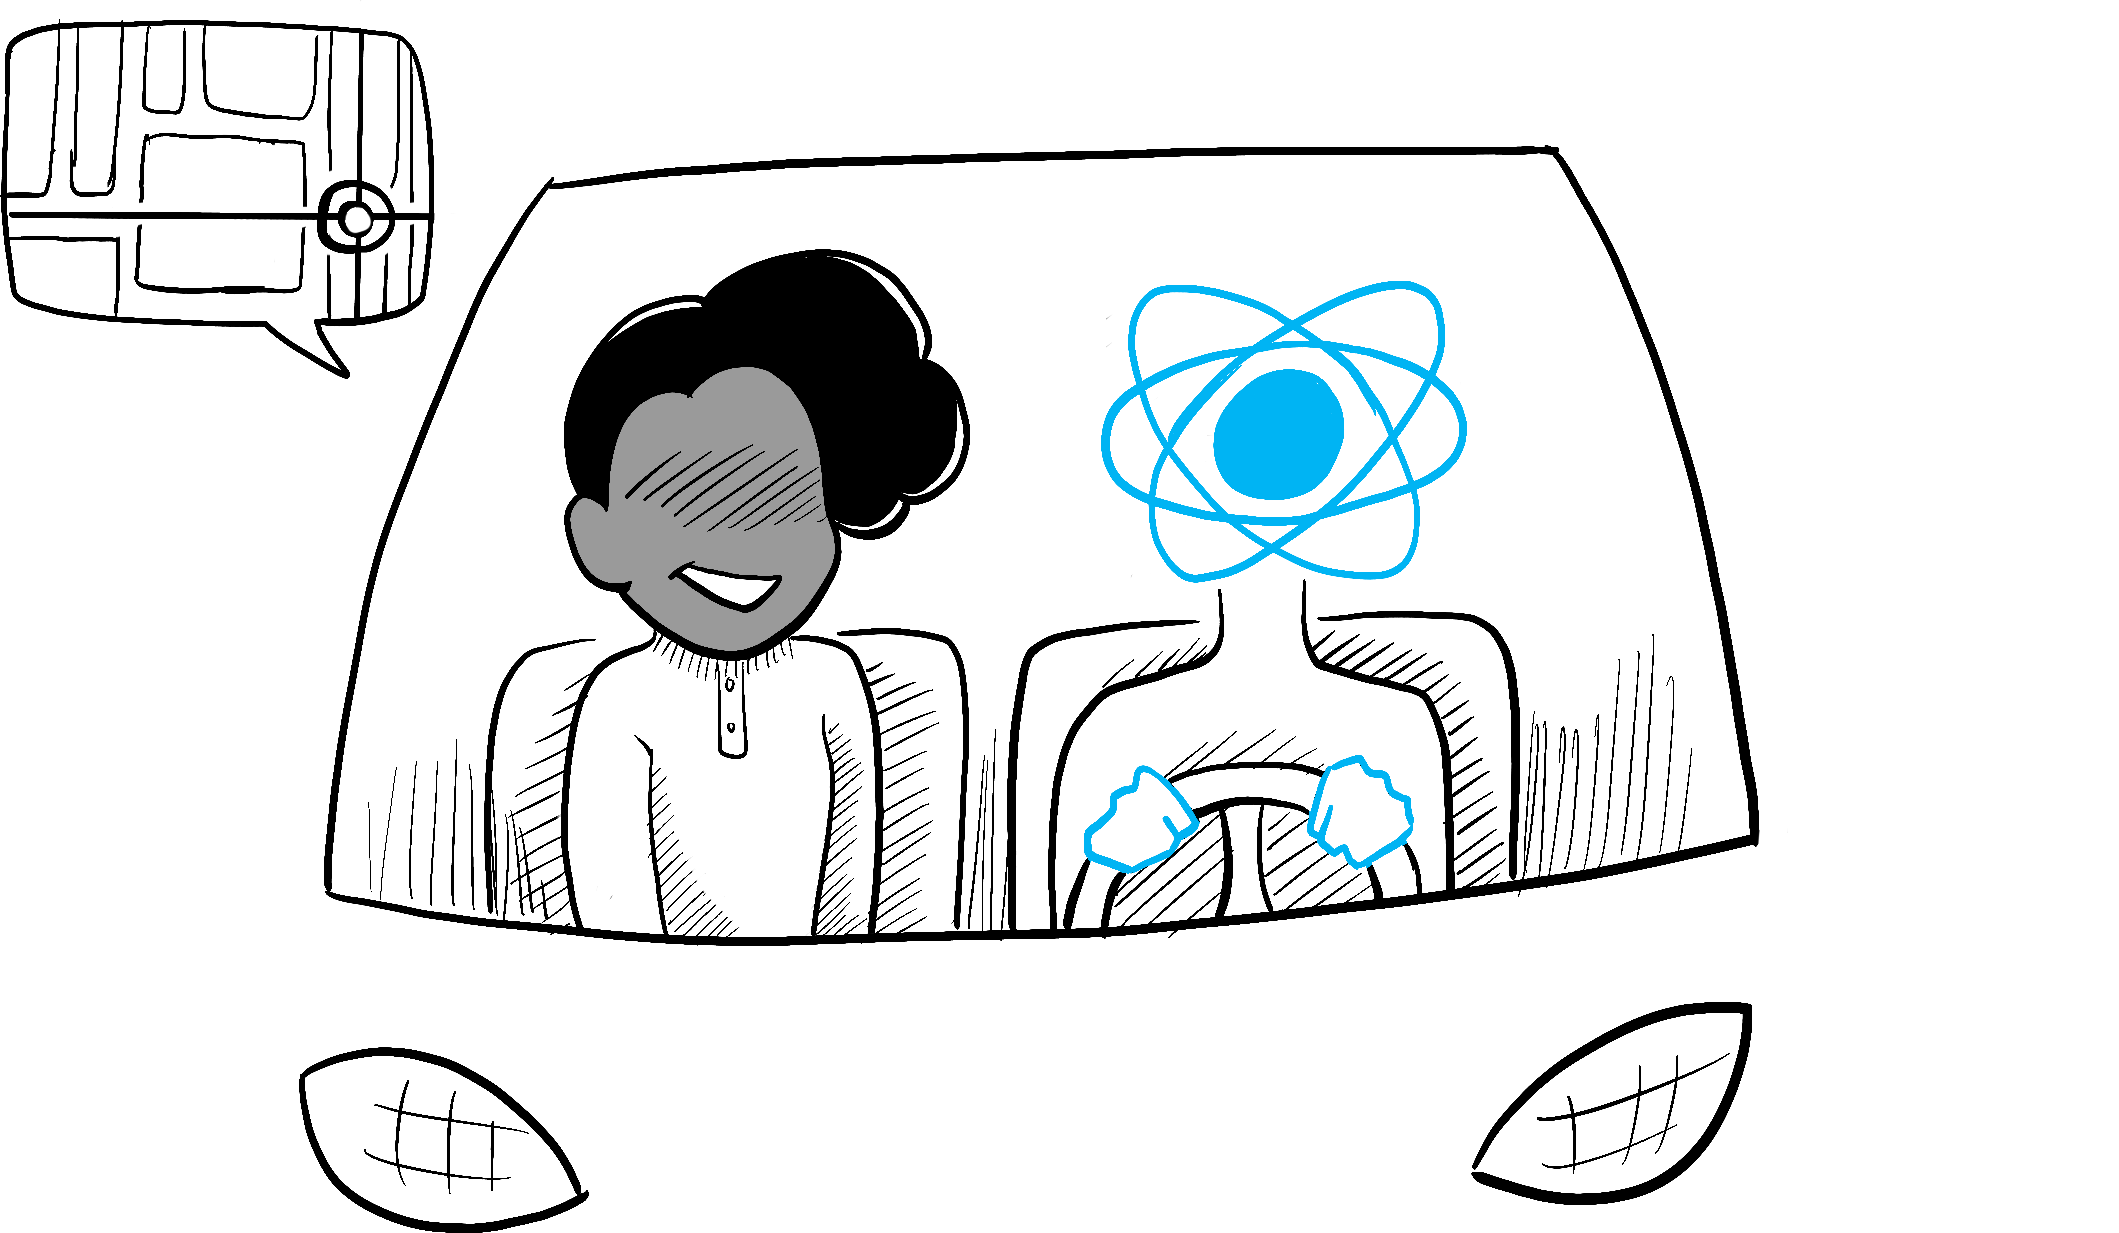 In a car driven by React, a passenger asks to be taken to a specific place on the map. React figures out how to do that.